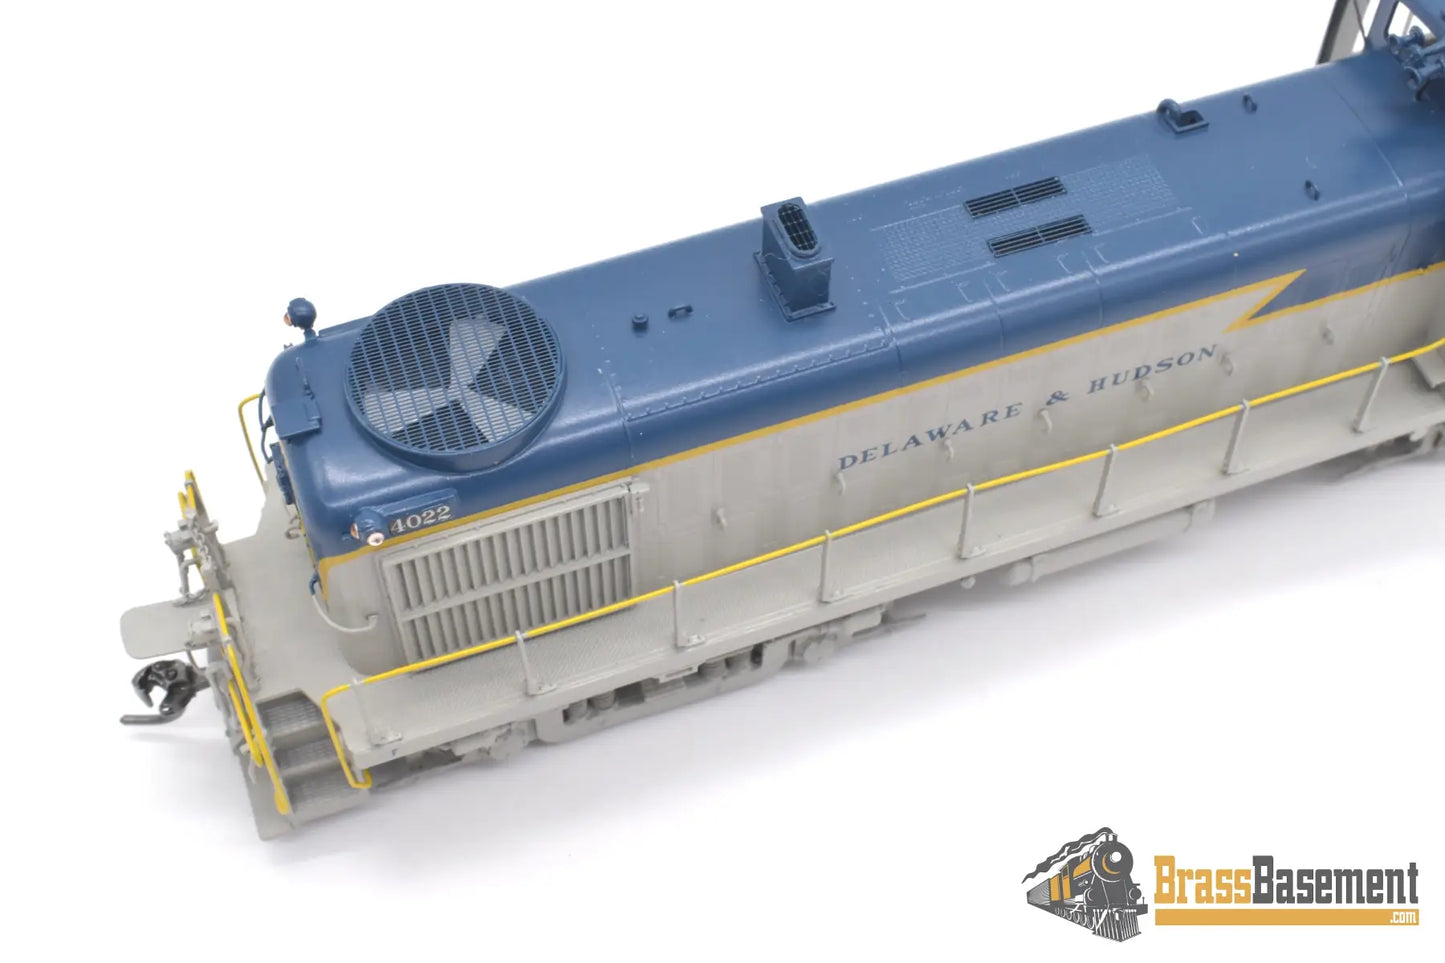 Ho Brass - Dp - 9323.1 Division Point Delaware & Hudson Rs - 2 #4022 Factory Paint Diesel